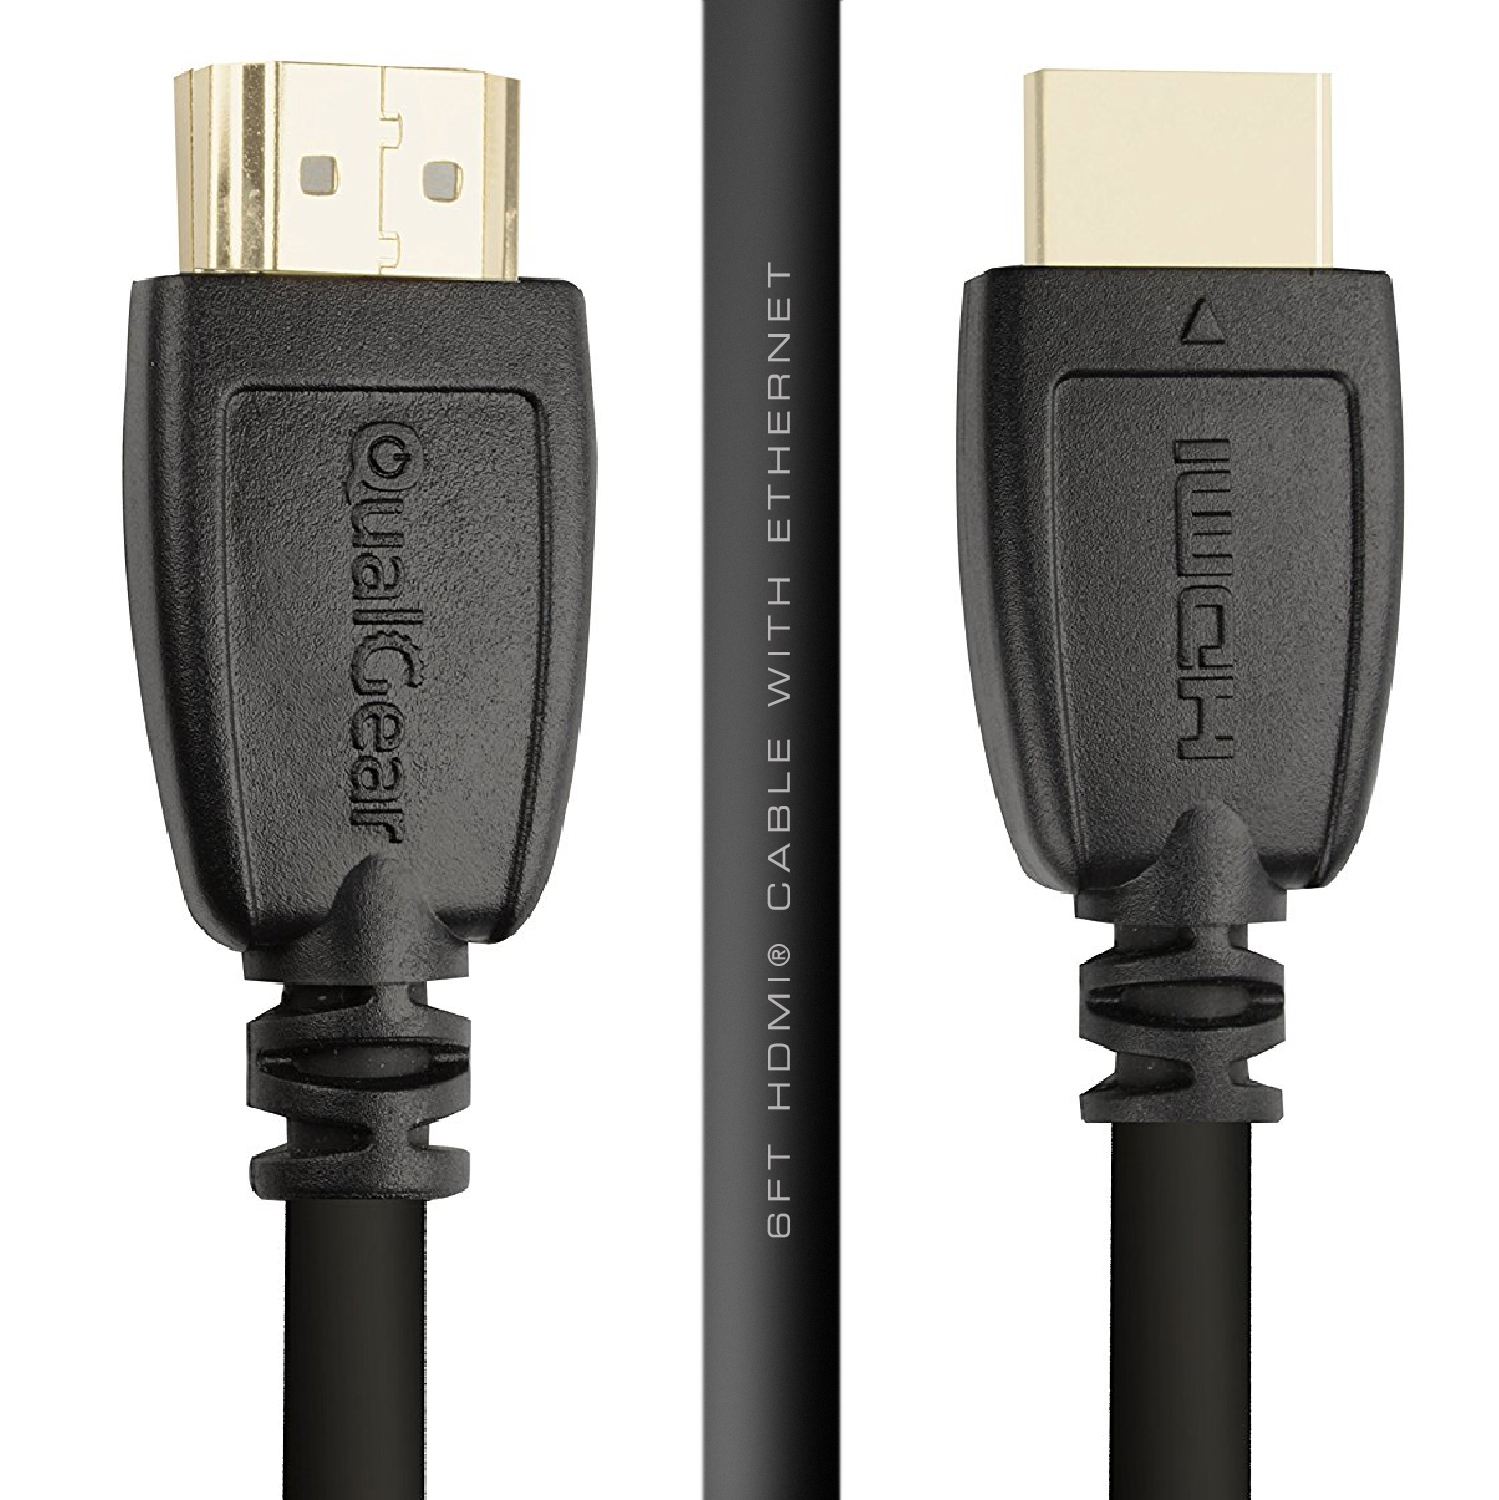 Qualgear 6 Feet-2 Pack HDMI 2.0 cable with 24k Gold Plated Contacts, Supports 4k Ultra HD, 3D, Upto 18Gbps, Ethernet, 100% OFC (QG-CBL-HD20-6FT-2PK)